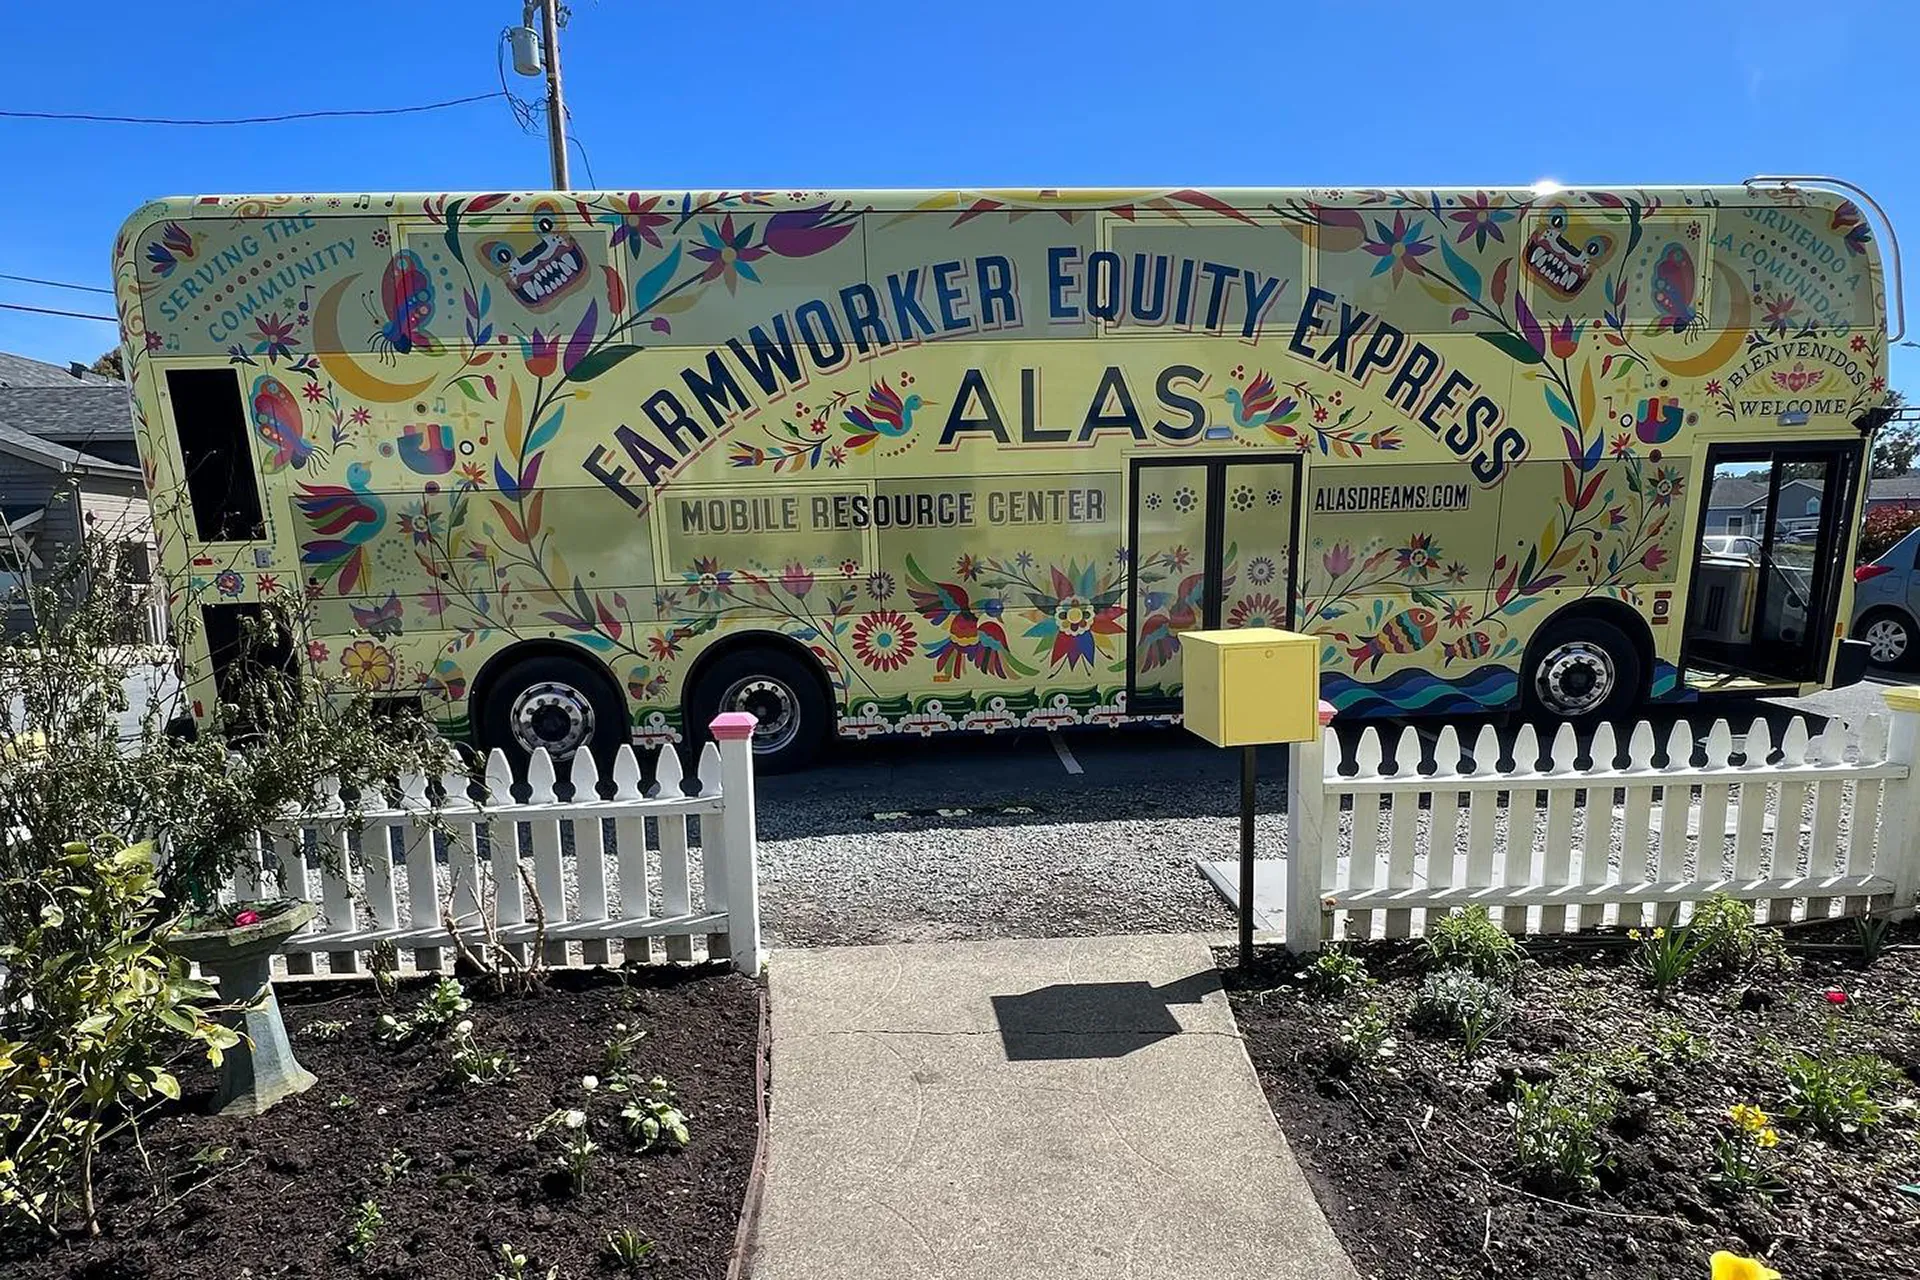 Alas Farmworker Equity Express mobile resource center bus